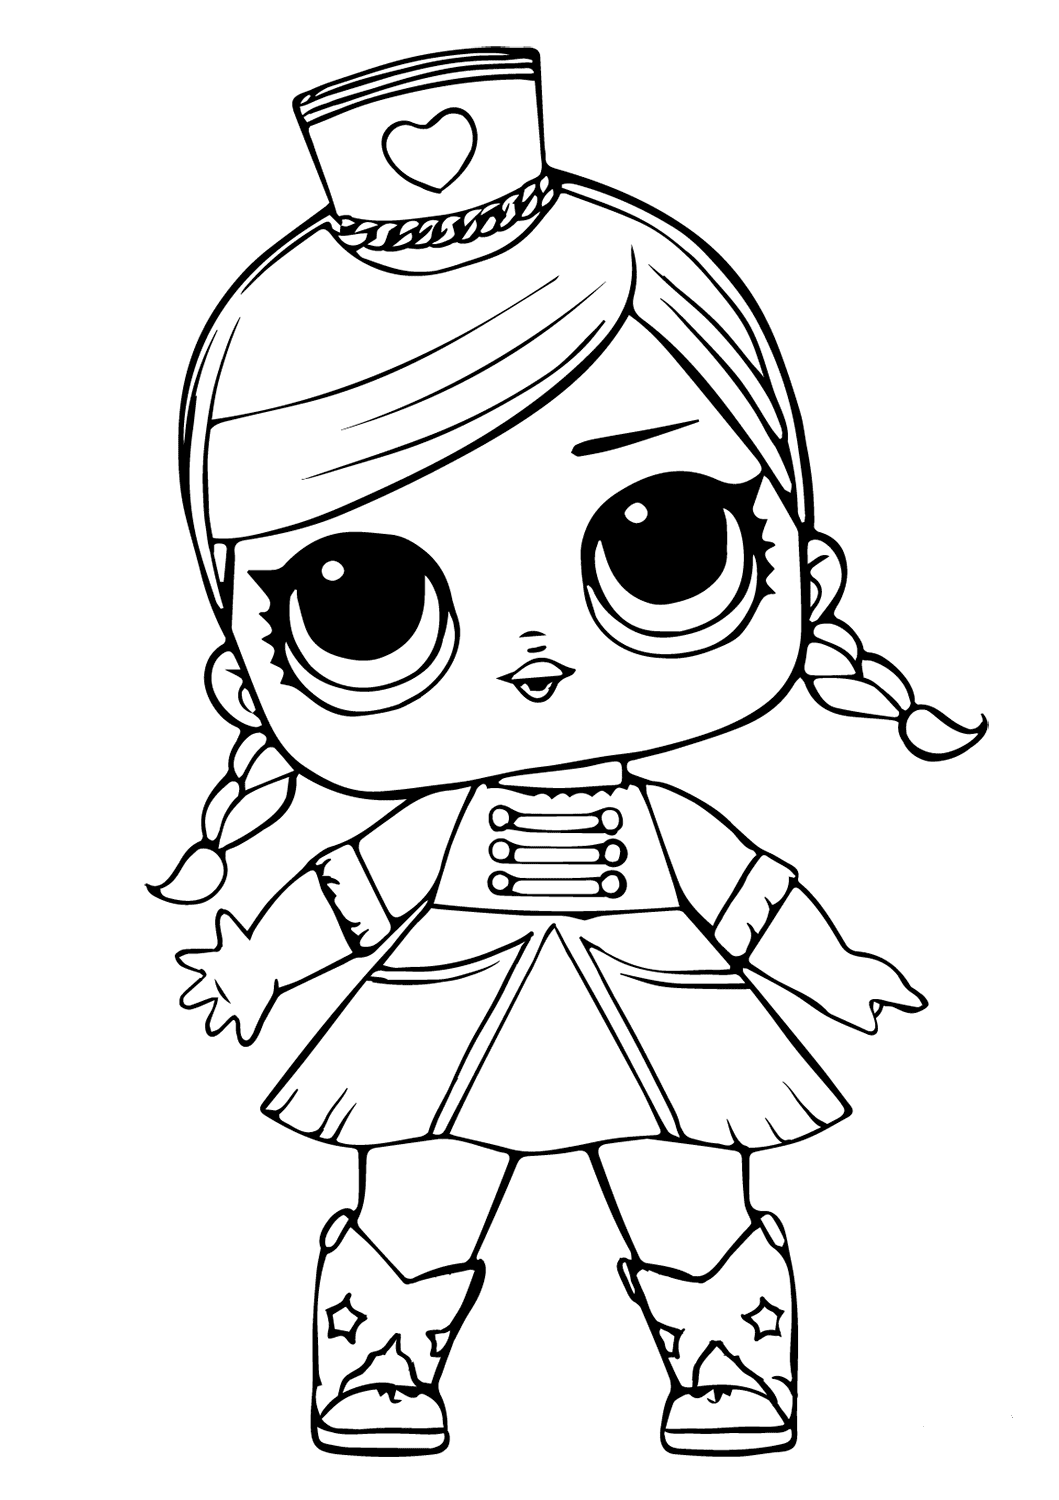 LOL Coloring Pages FREE Printable 84